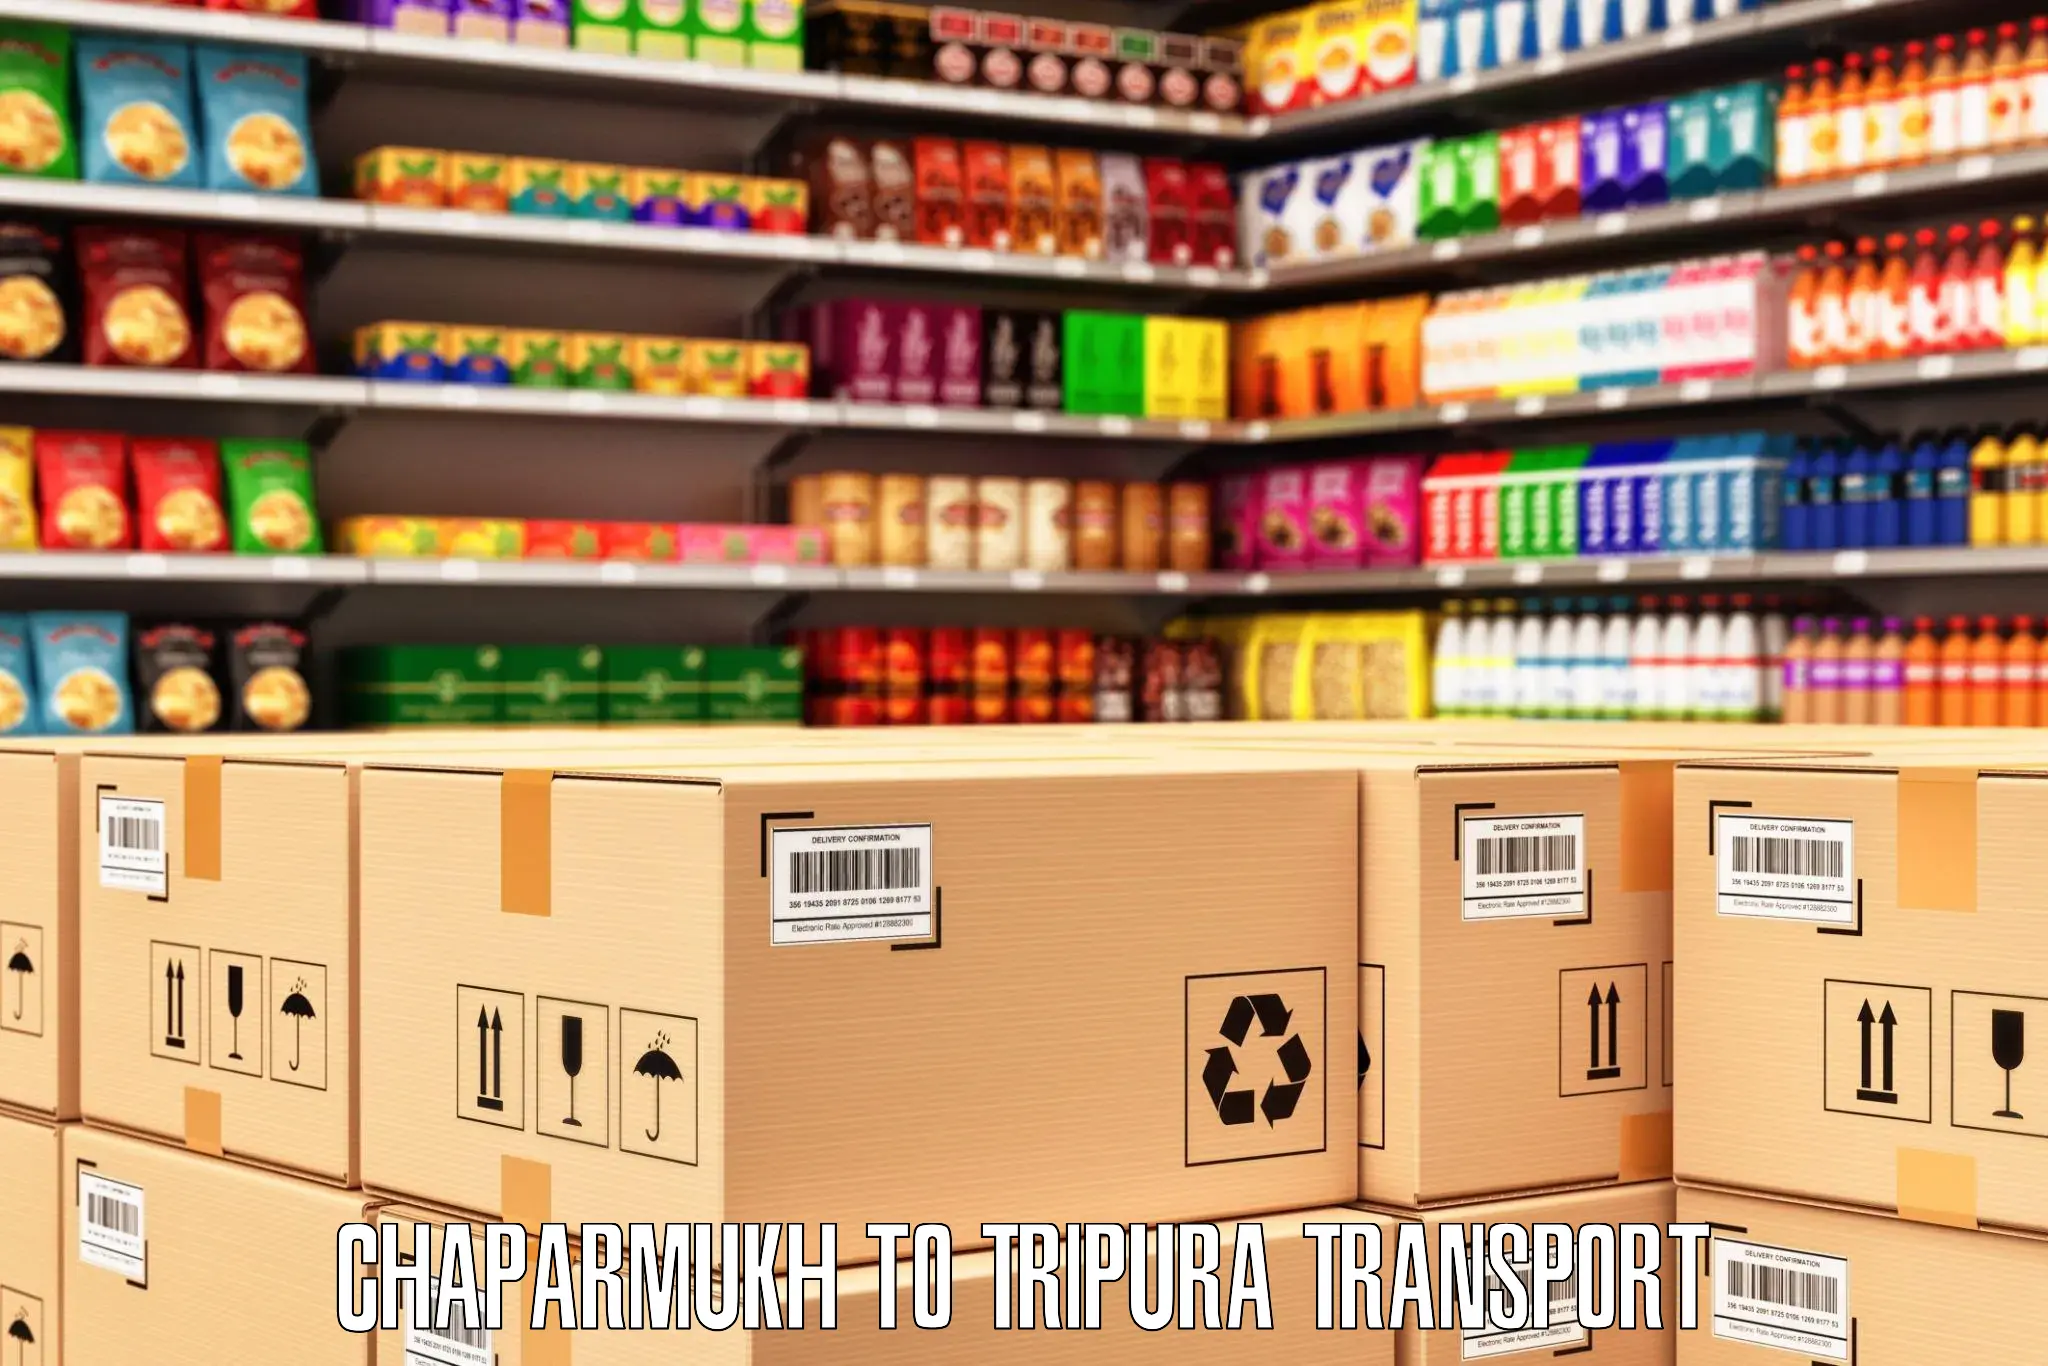 Air cargo transport services in Chaparmukh to Tripura